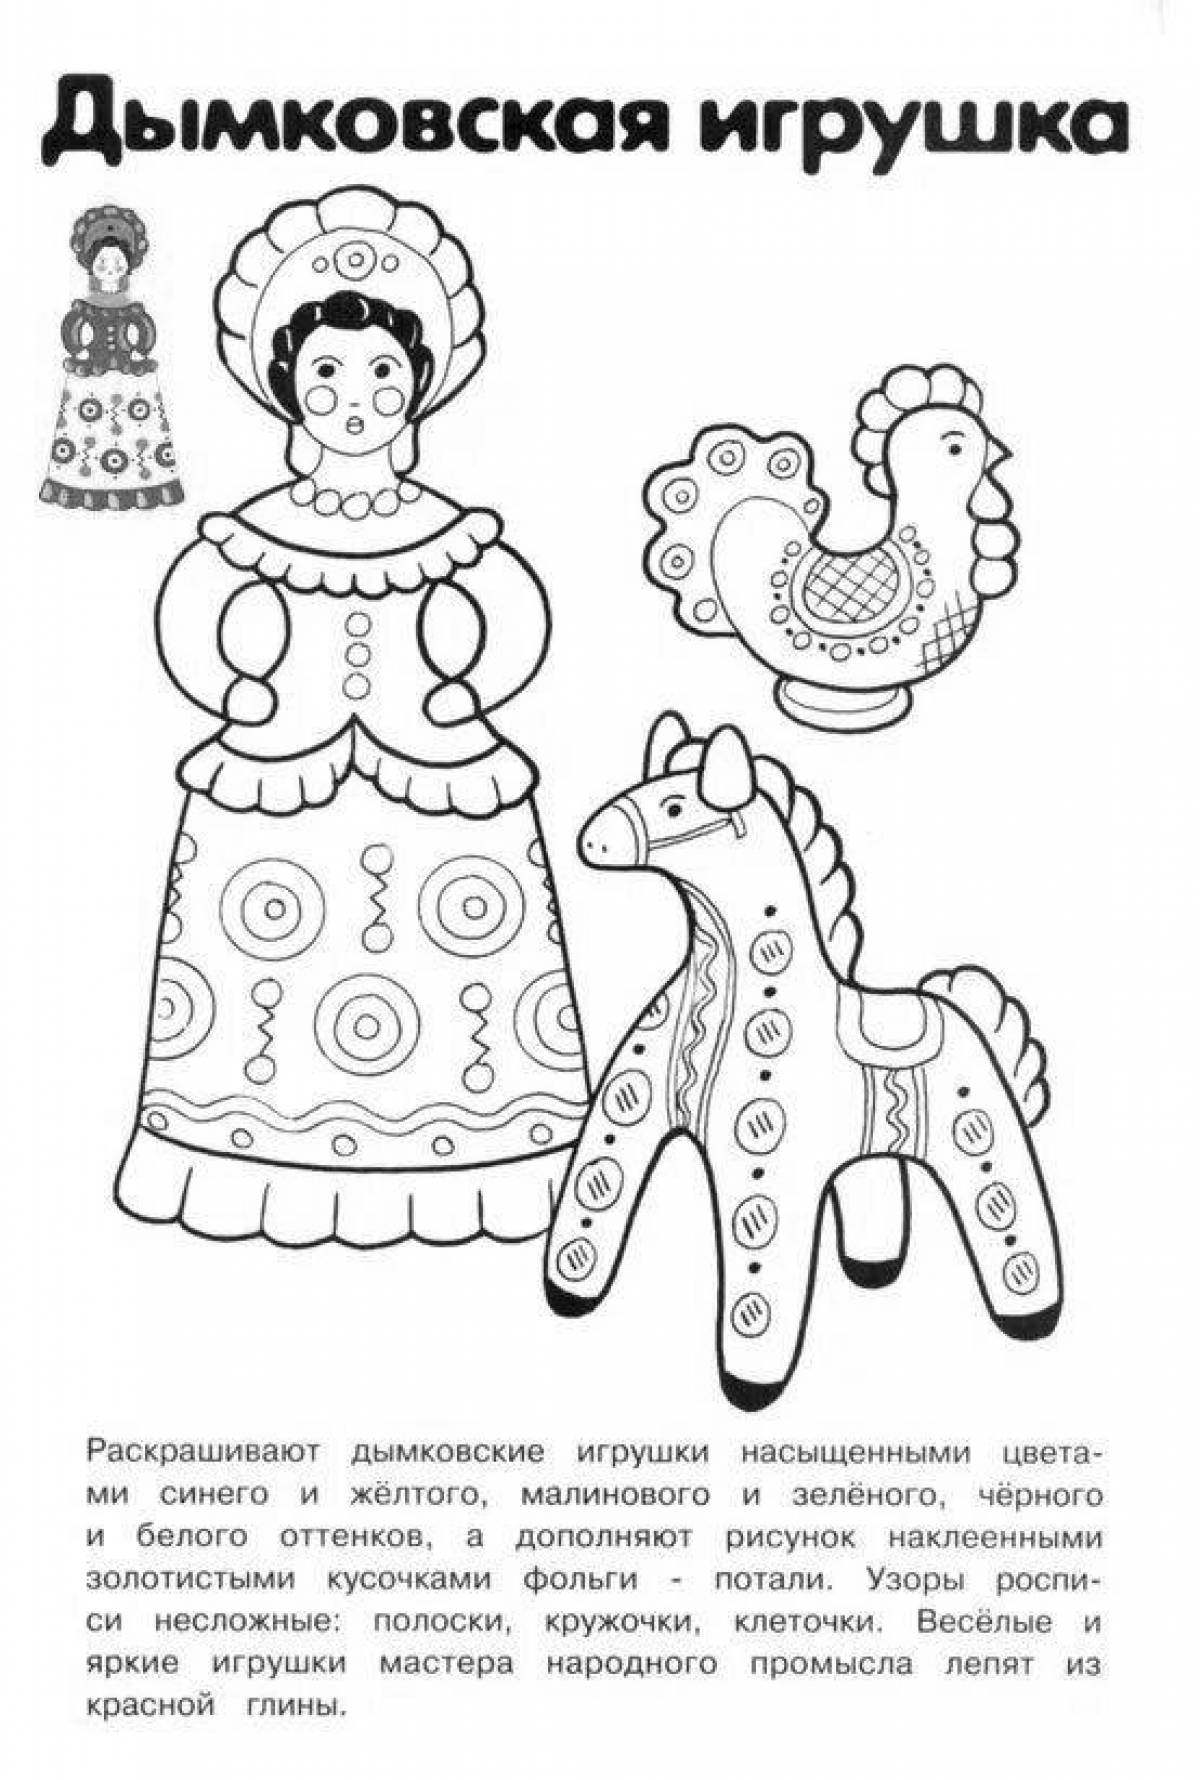 Bright Russian folk crafts for the little ones